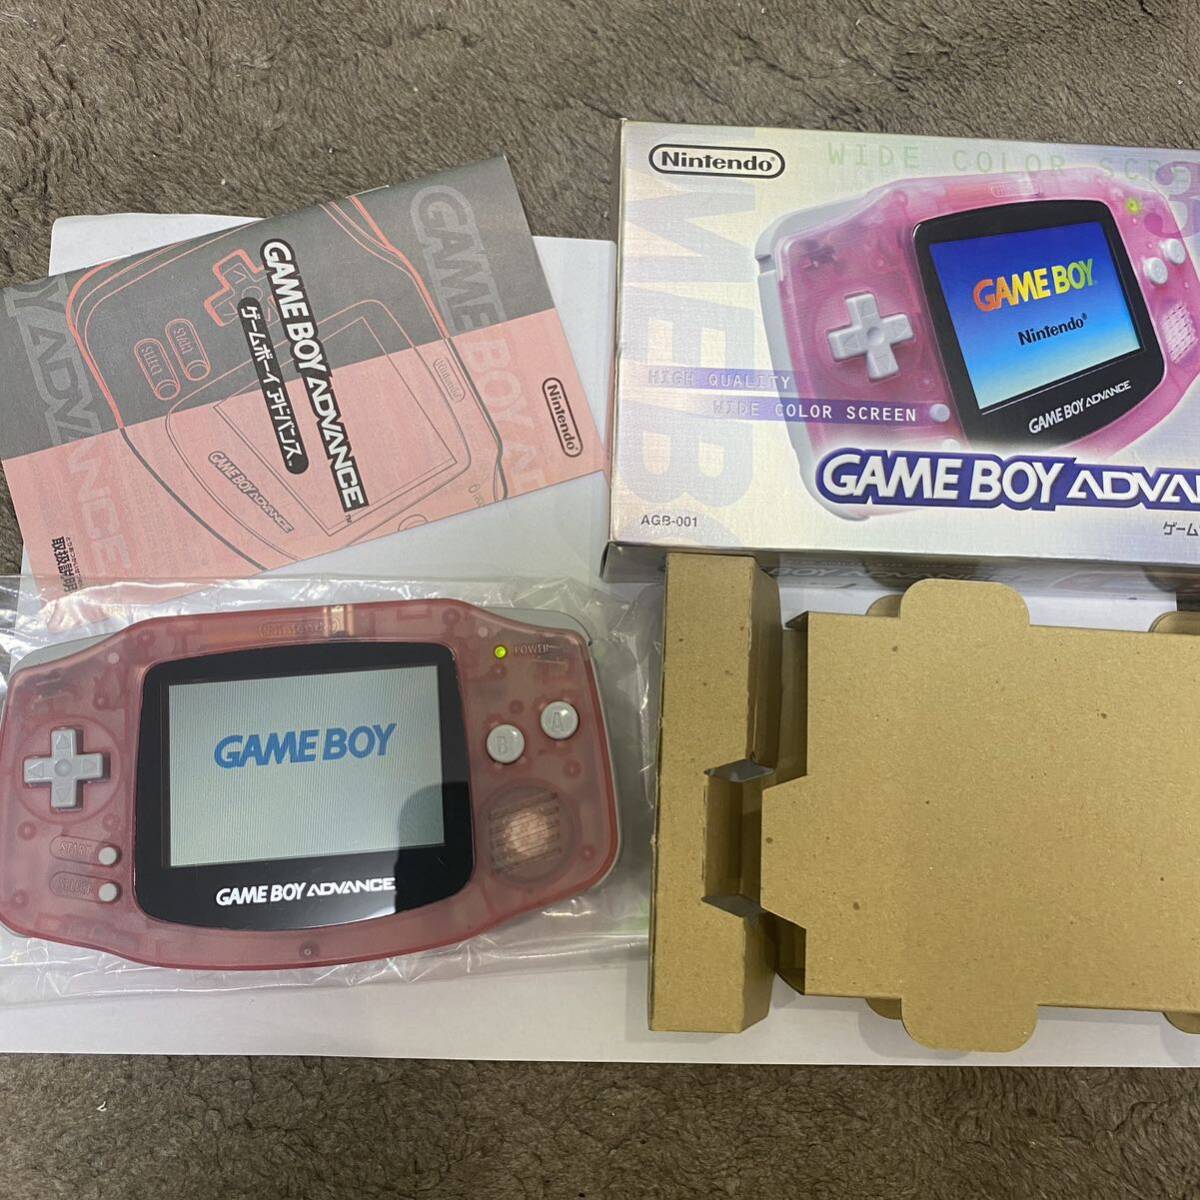  Game Boy Advance # beautiful goods operation excellent verification settled rare GBA nintendo instructions box Nintendo Nintendo Game Boy Mill key pink 